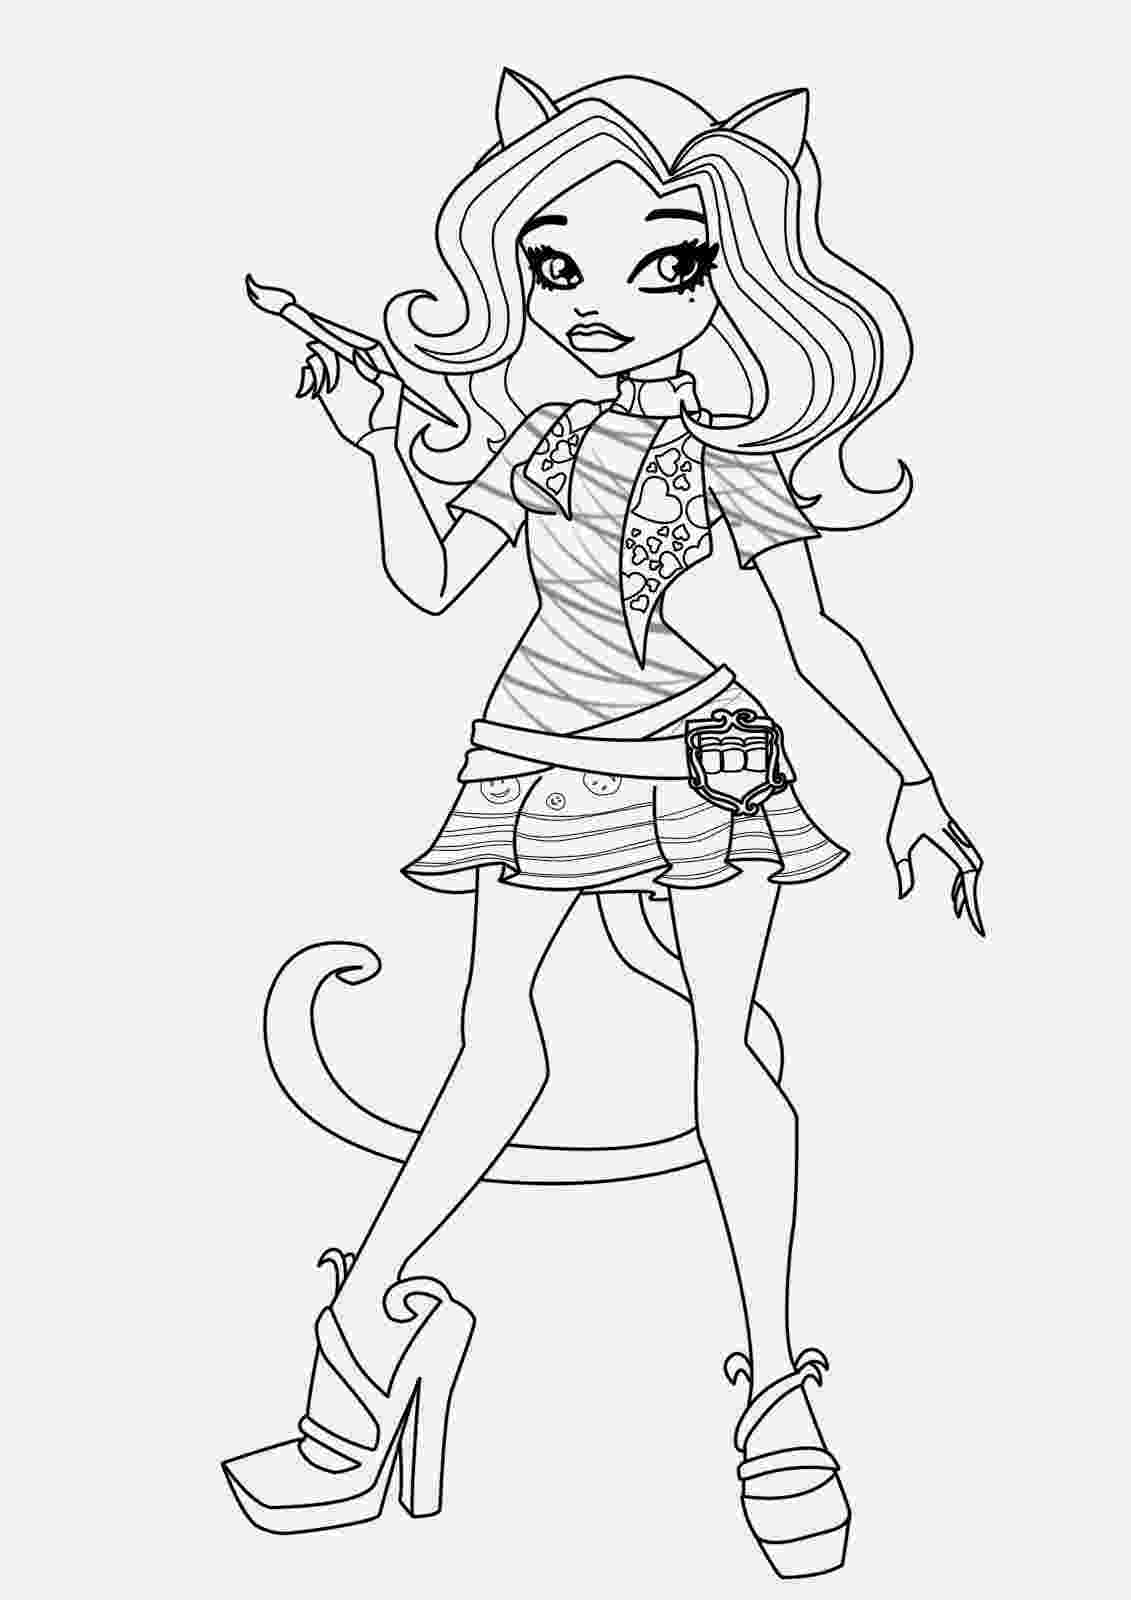 monster high for coloring 37 best images about colouring monster high on pinterest coloring high for monster 